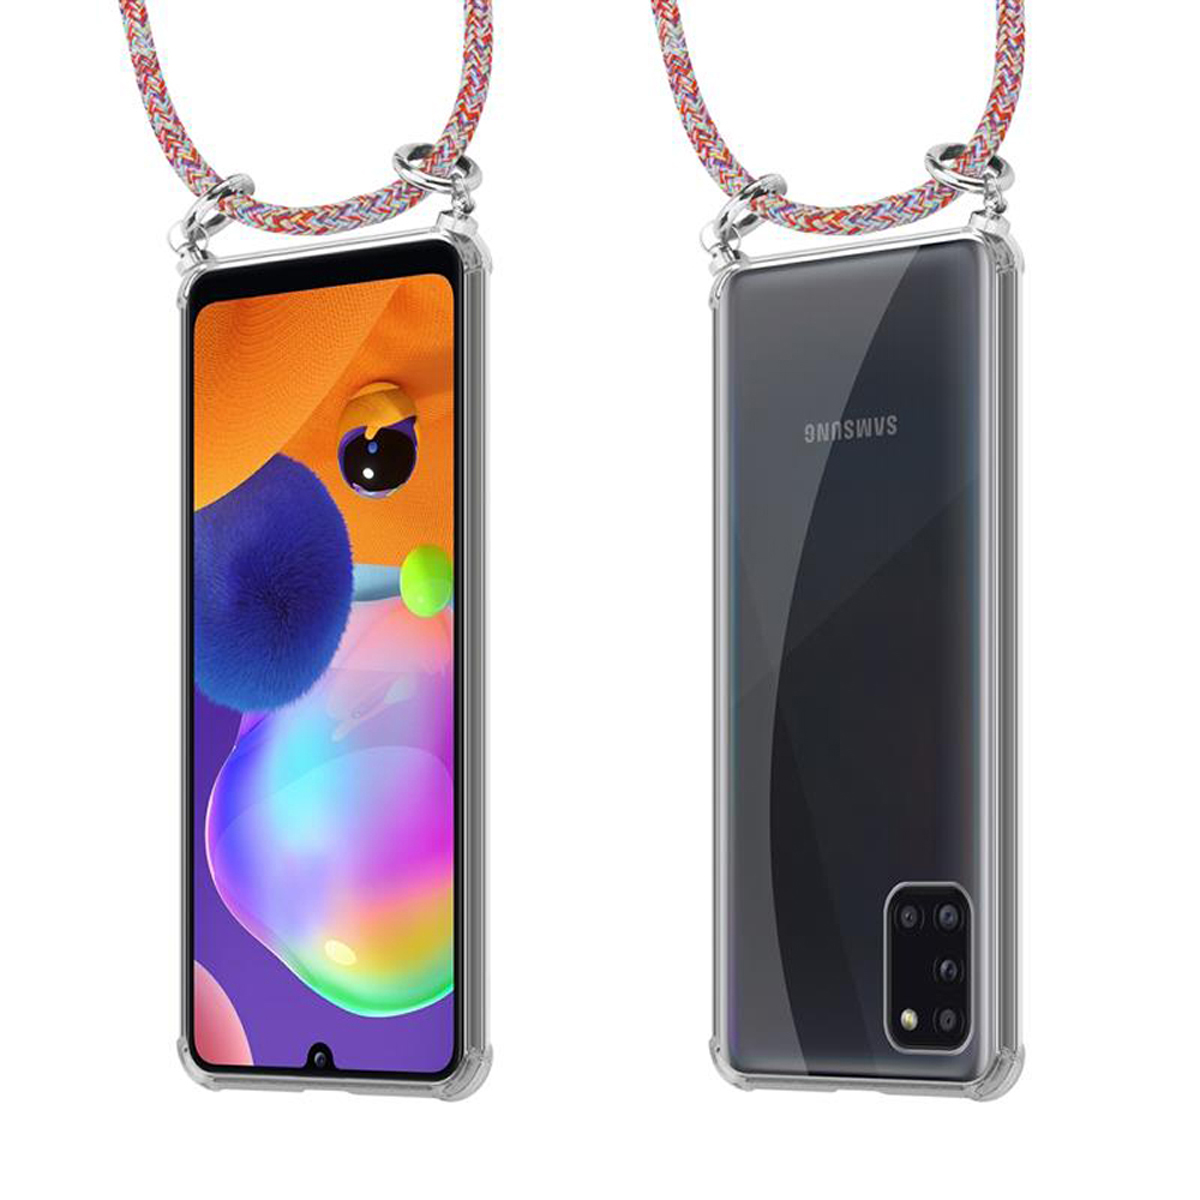 Silber abnehmbarer Kordel COLORFUL Handy mit Ringen, Samsung, Galaxy und Hülle, Backcover, A31, CADORABO Kette PARROT Band